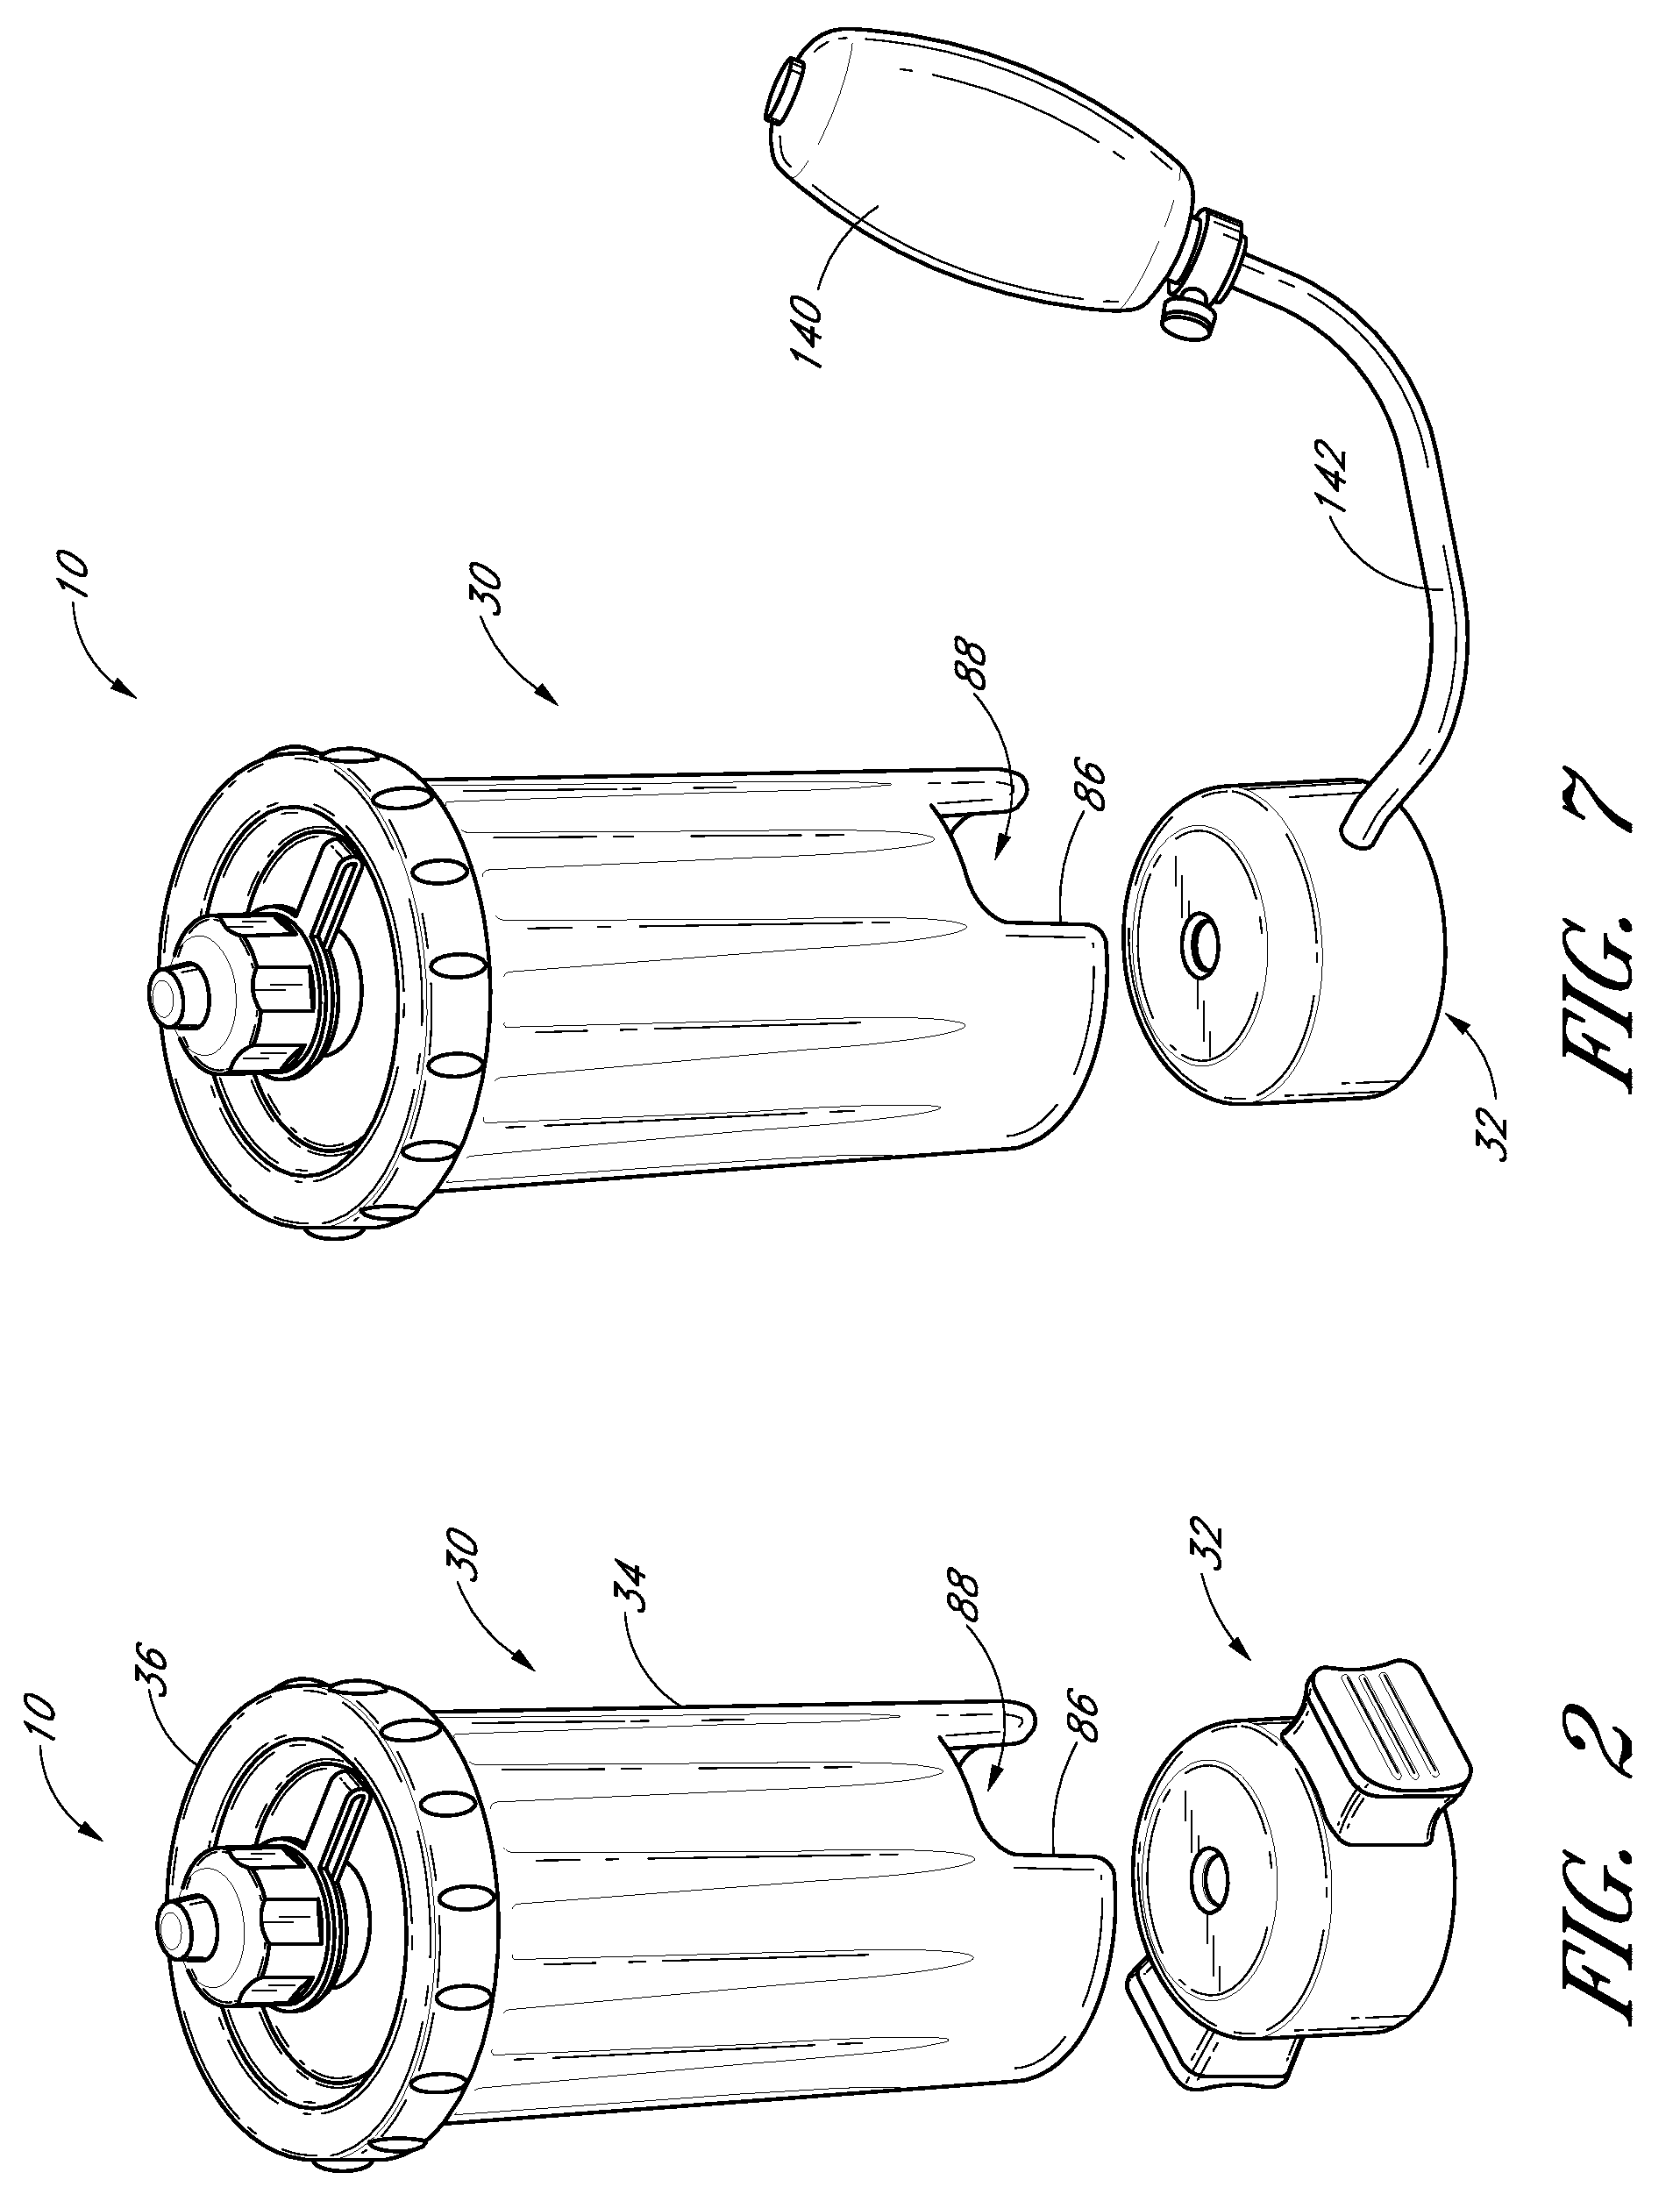 Enteral feeding systems, devices and methods